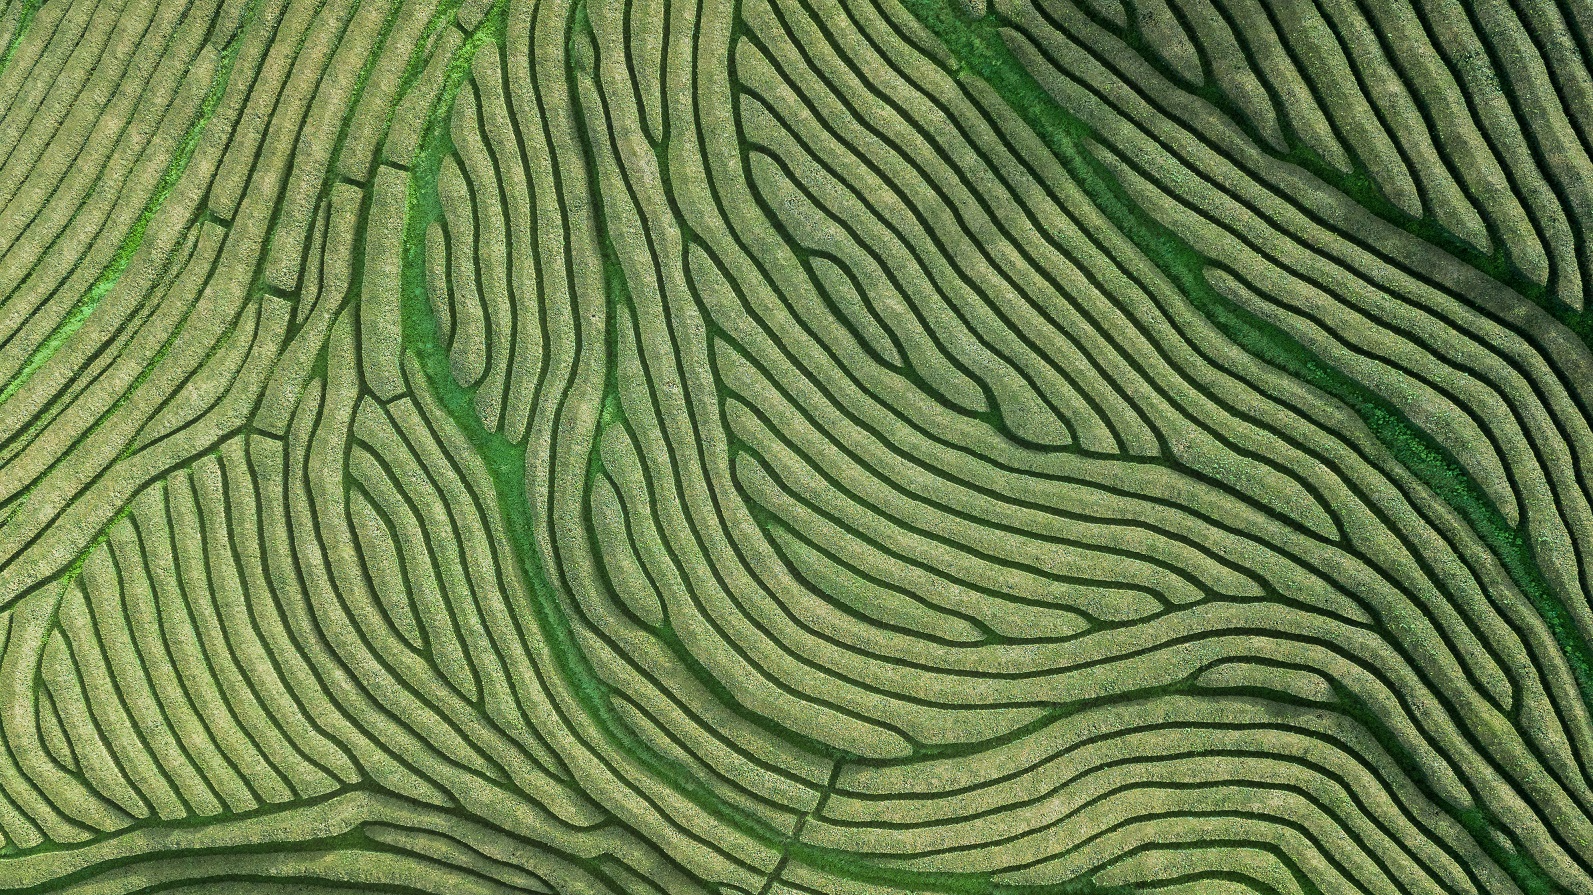 Rice fields shot from above 